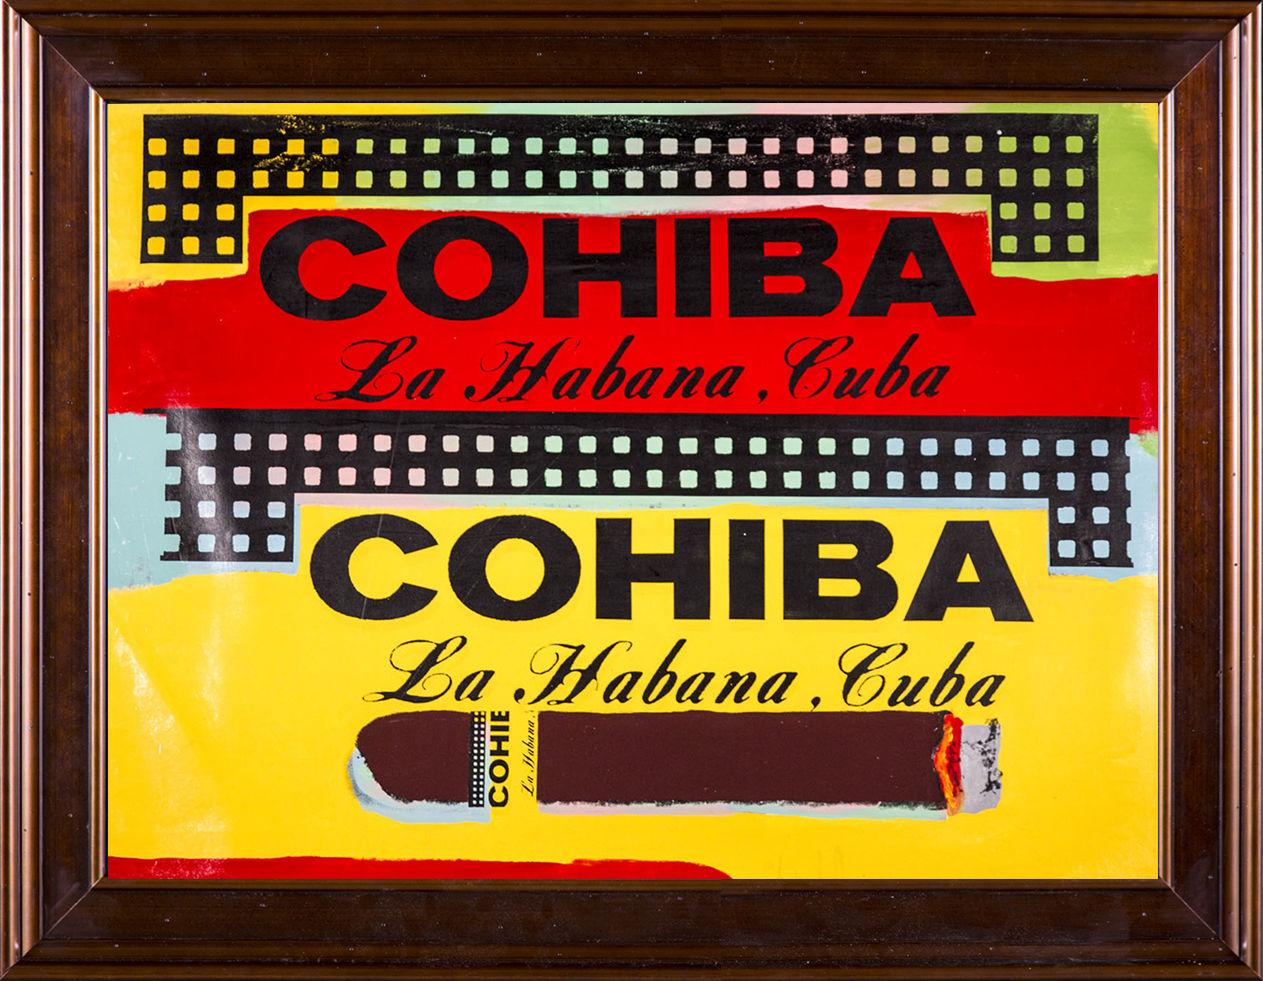 Artist: Steve Kaufman
Title: Double Cohiba
Medium: Original Oil Painting on Screen print Canvas
Size: 36" x 52"
Size Framed: Currently not Framed.  Photos Generated to give you an idea.  We do have another listing identical to this that is framed